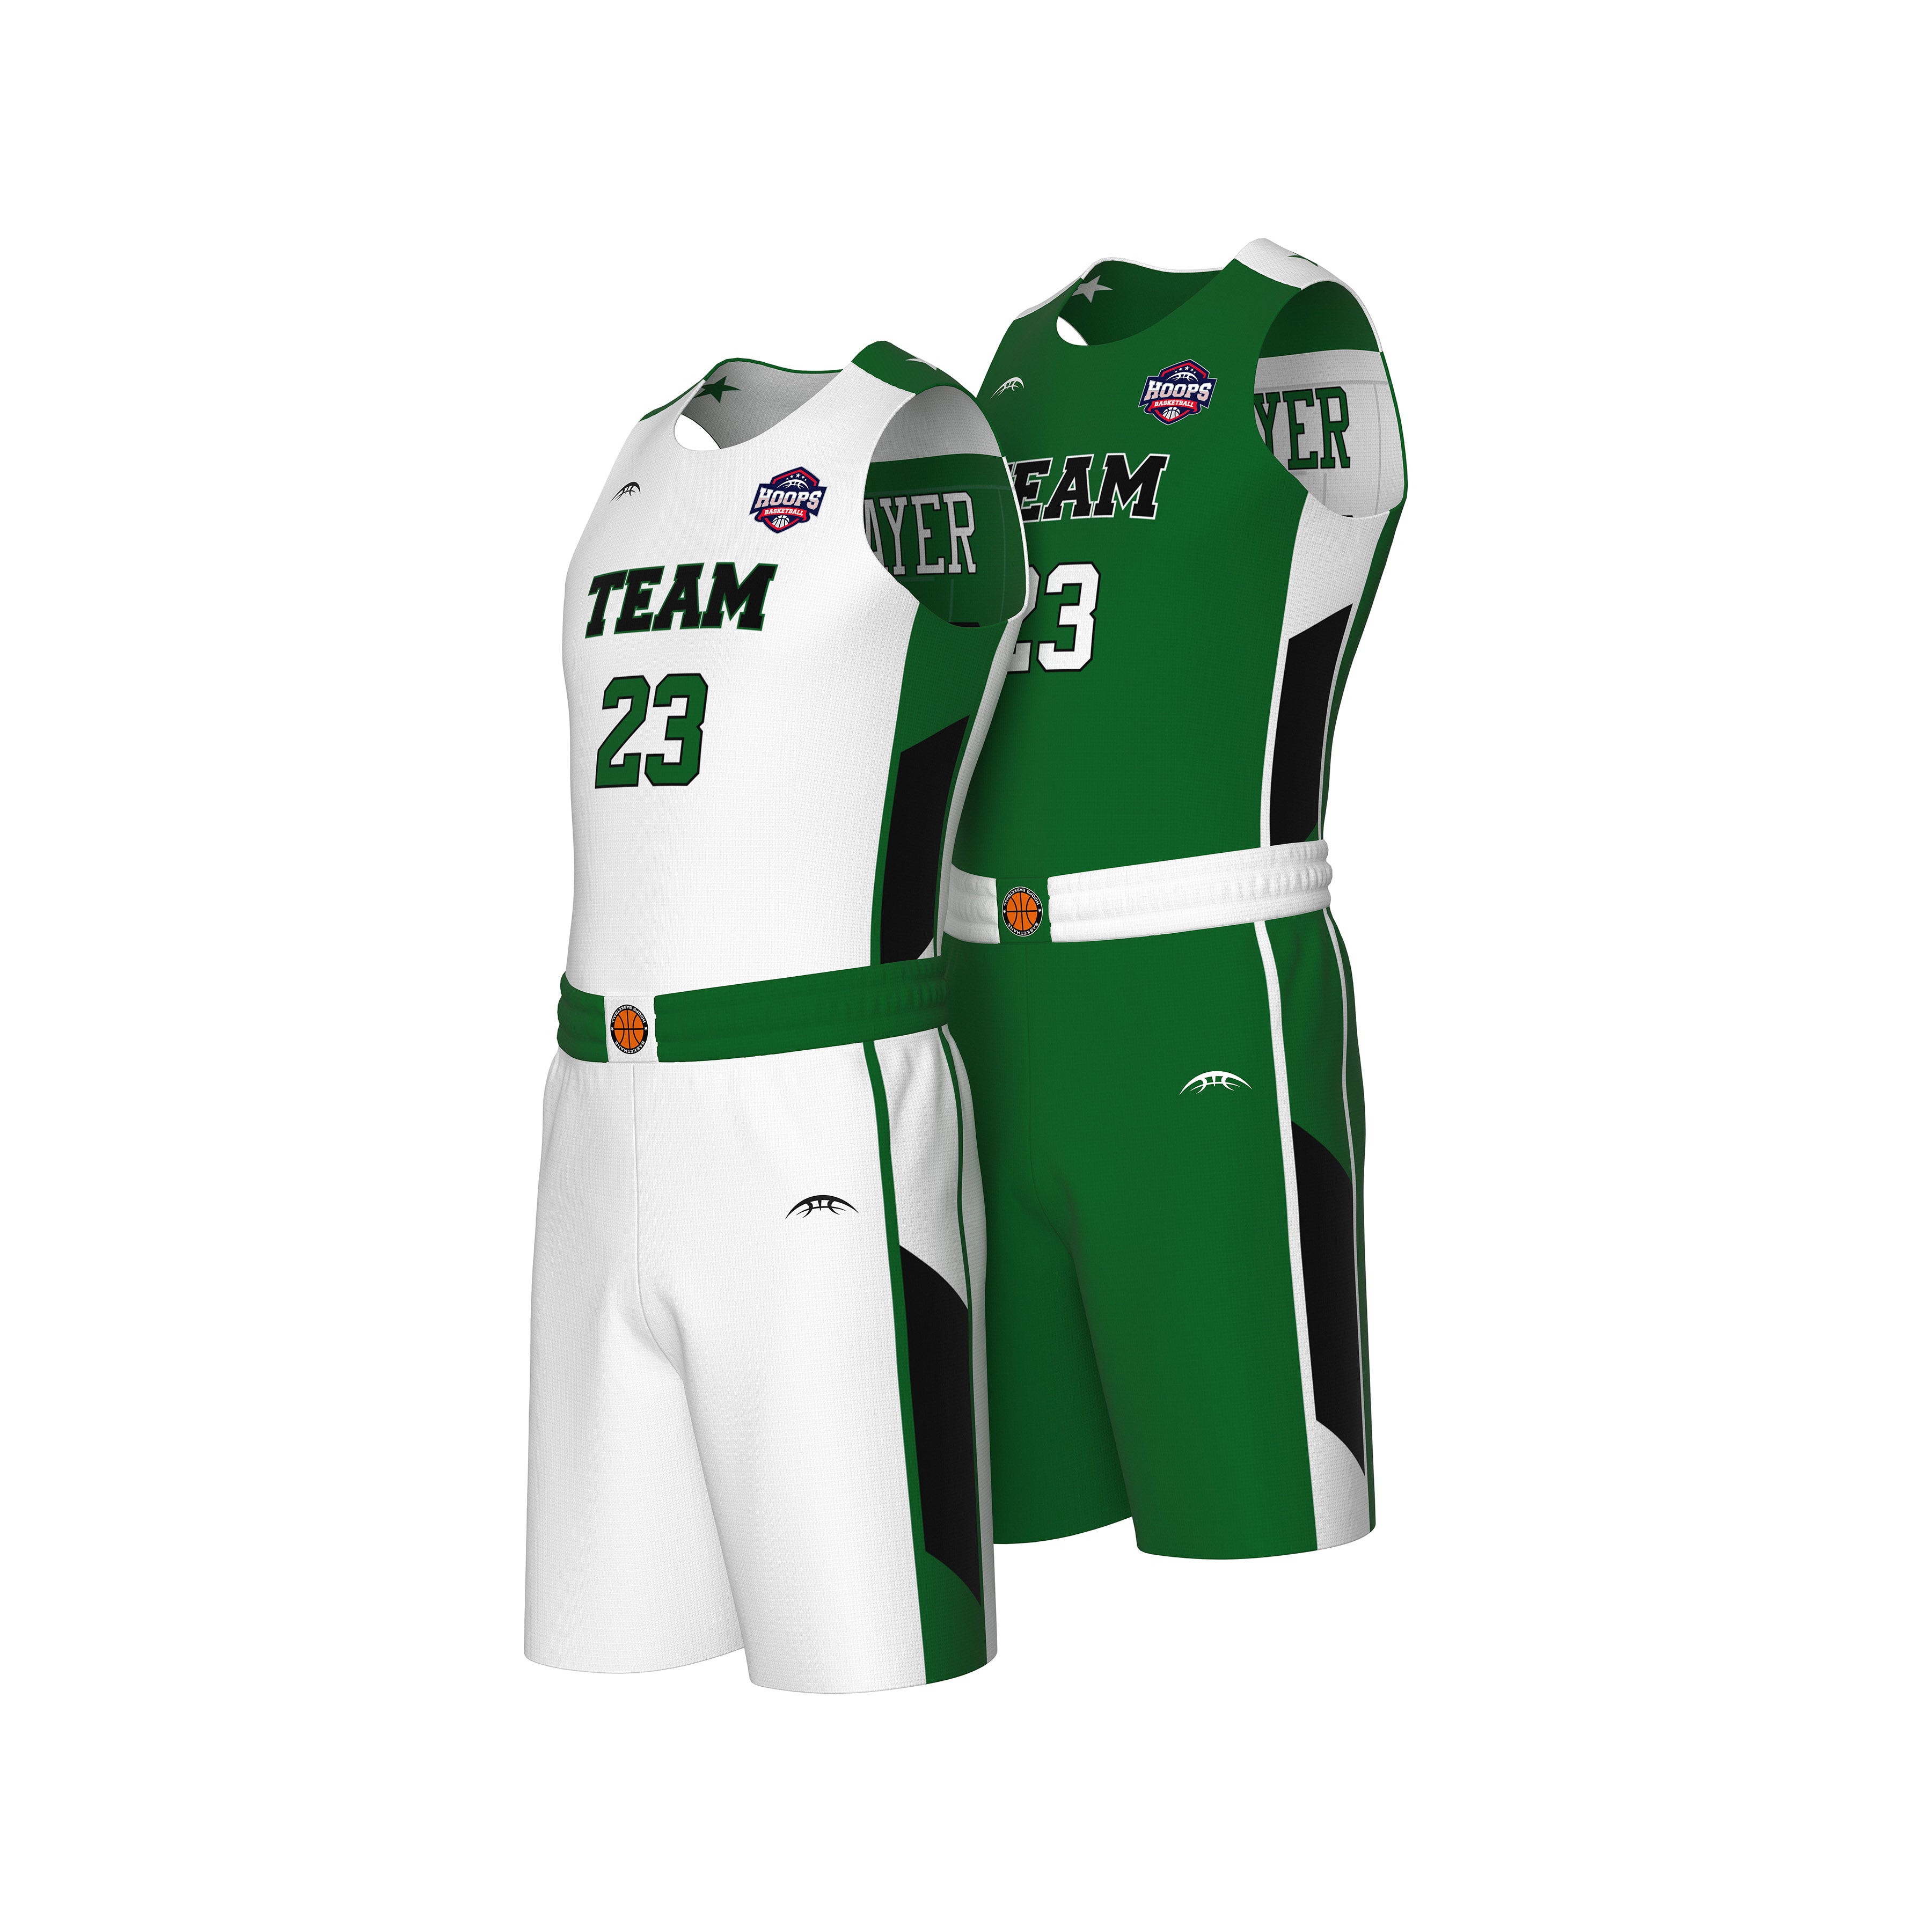 Custom Basketball Uniforms & Jerseys for your Team - Made in the